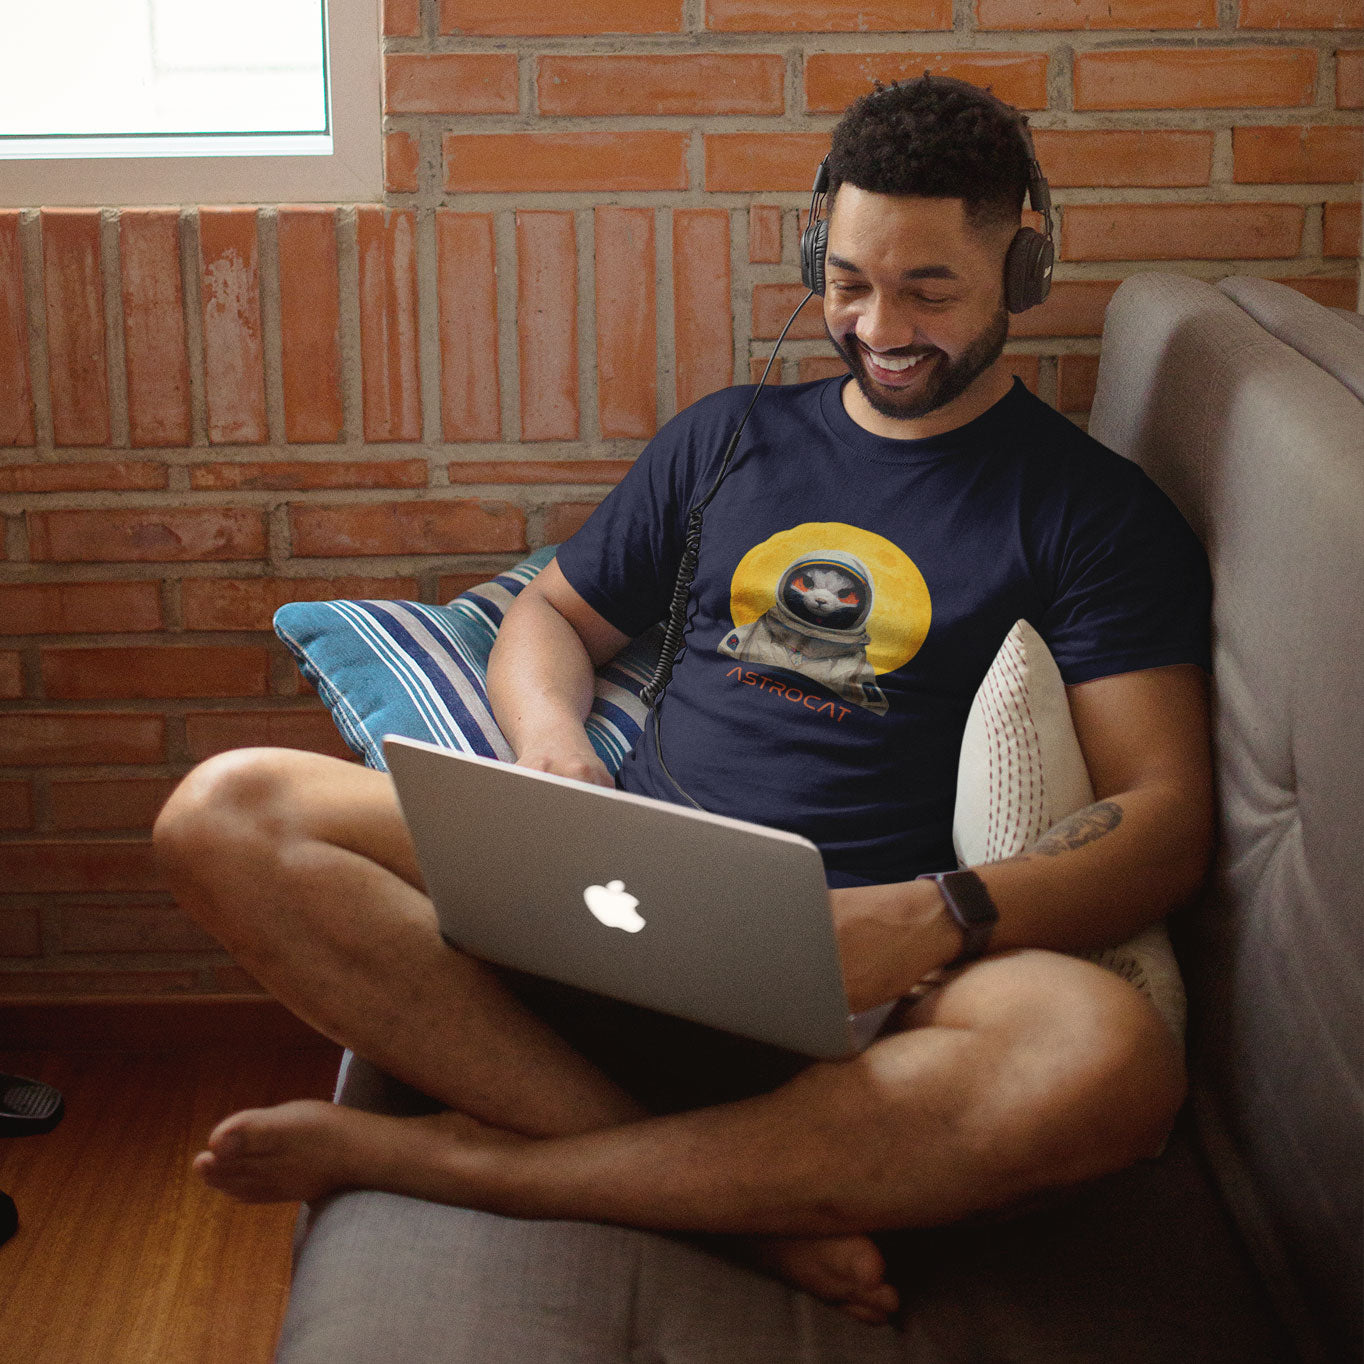 A guy listening to music wearing a navy t-shirt with an Astrocat print on the front